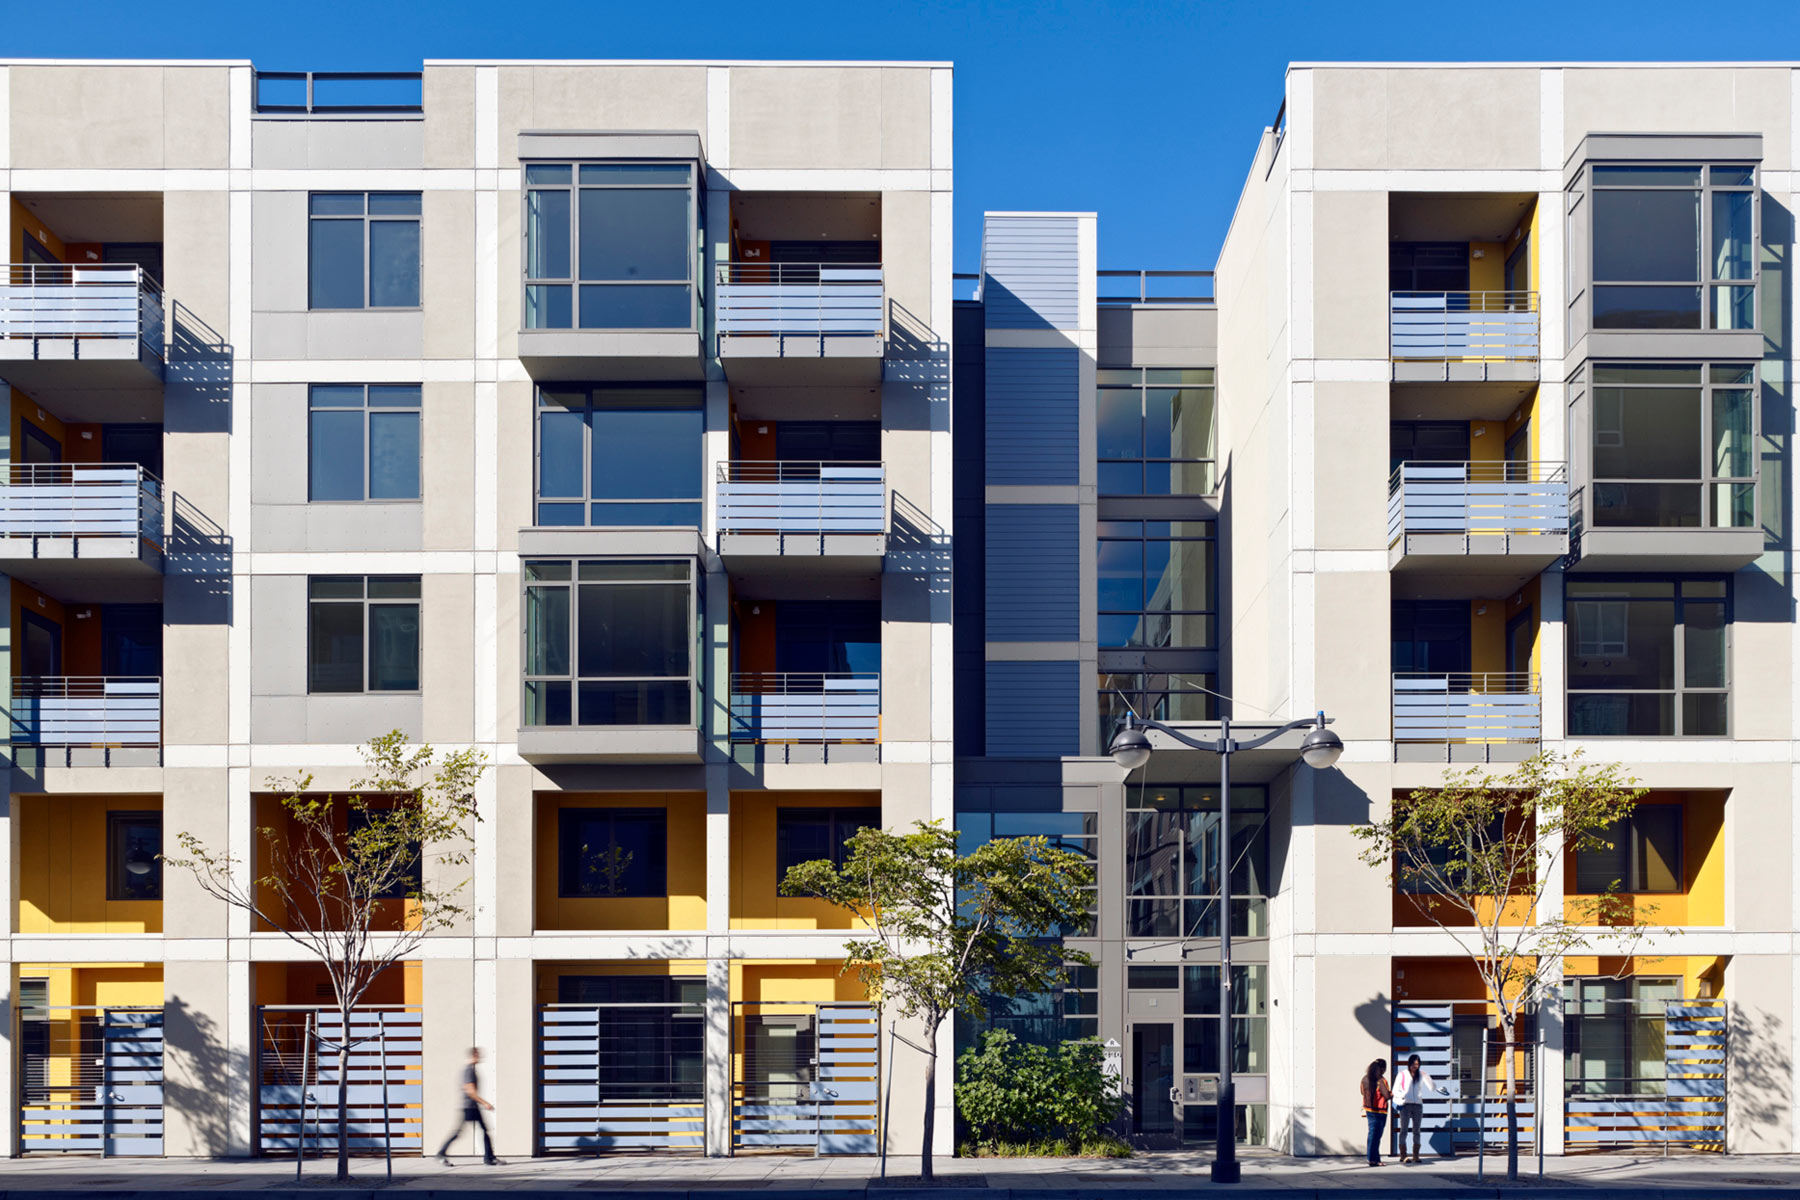 Mission Walk is the first sustainable, affordable housing development in the Mission Bay neighborhood of San Francisco, achieving a LEED Silver rating.